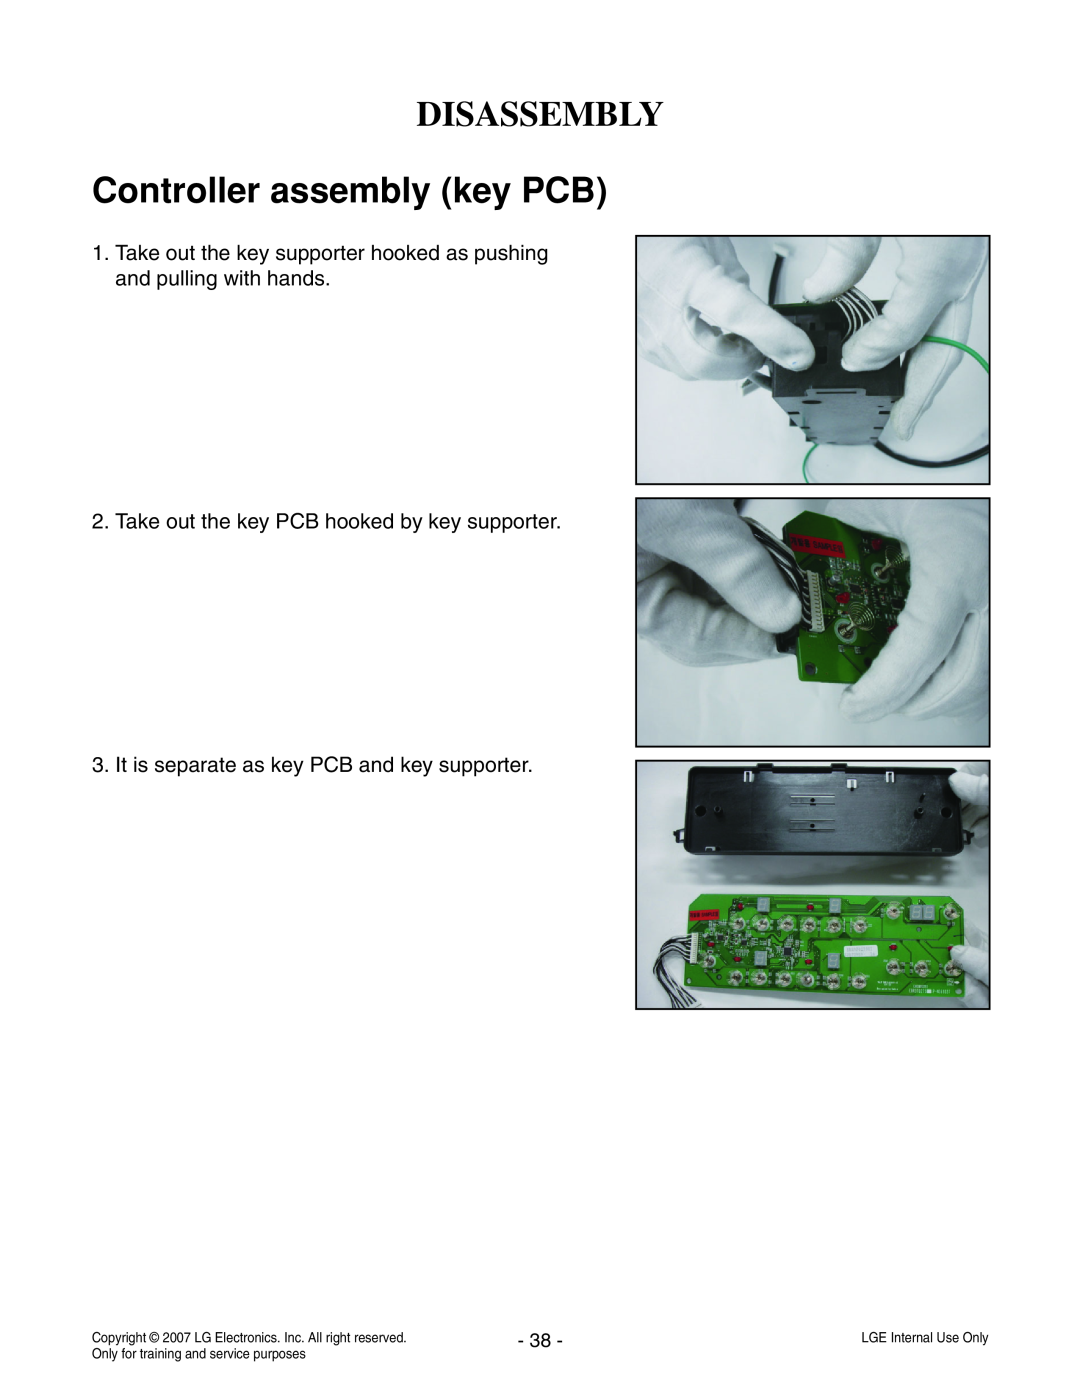 LG Electronics LCE30845 Controller assembly key PCB, Disassembly, Take out the key PCB hooked by key supporter 